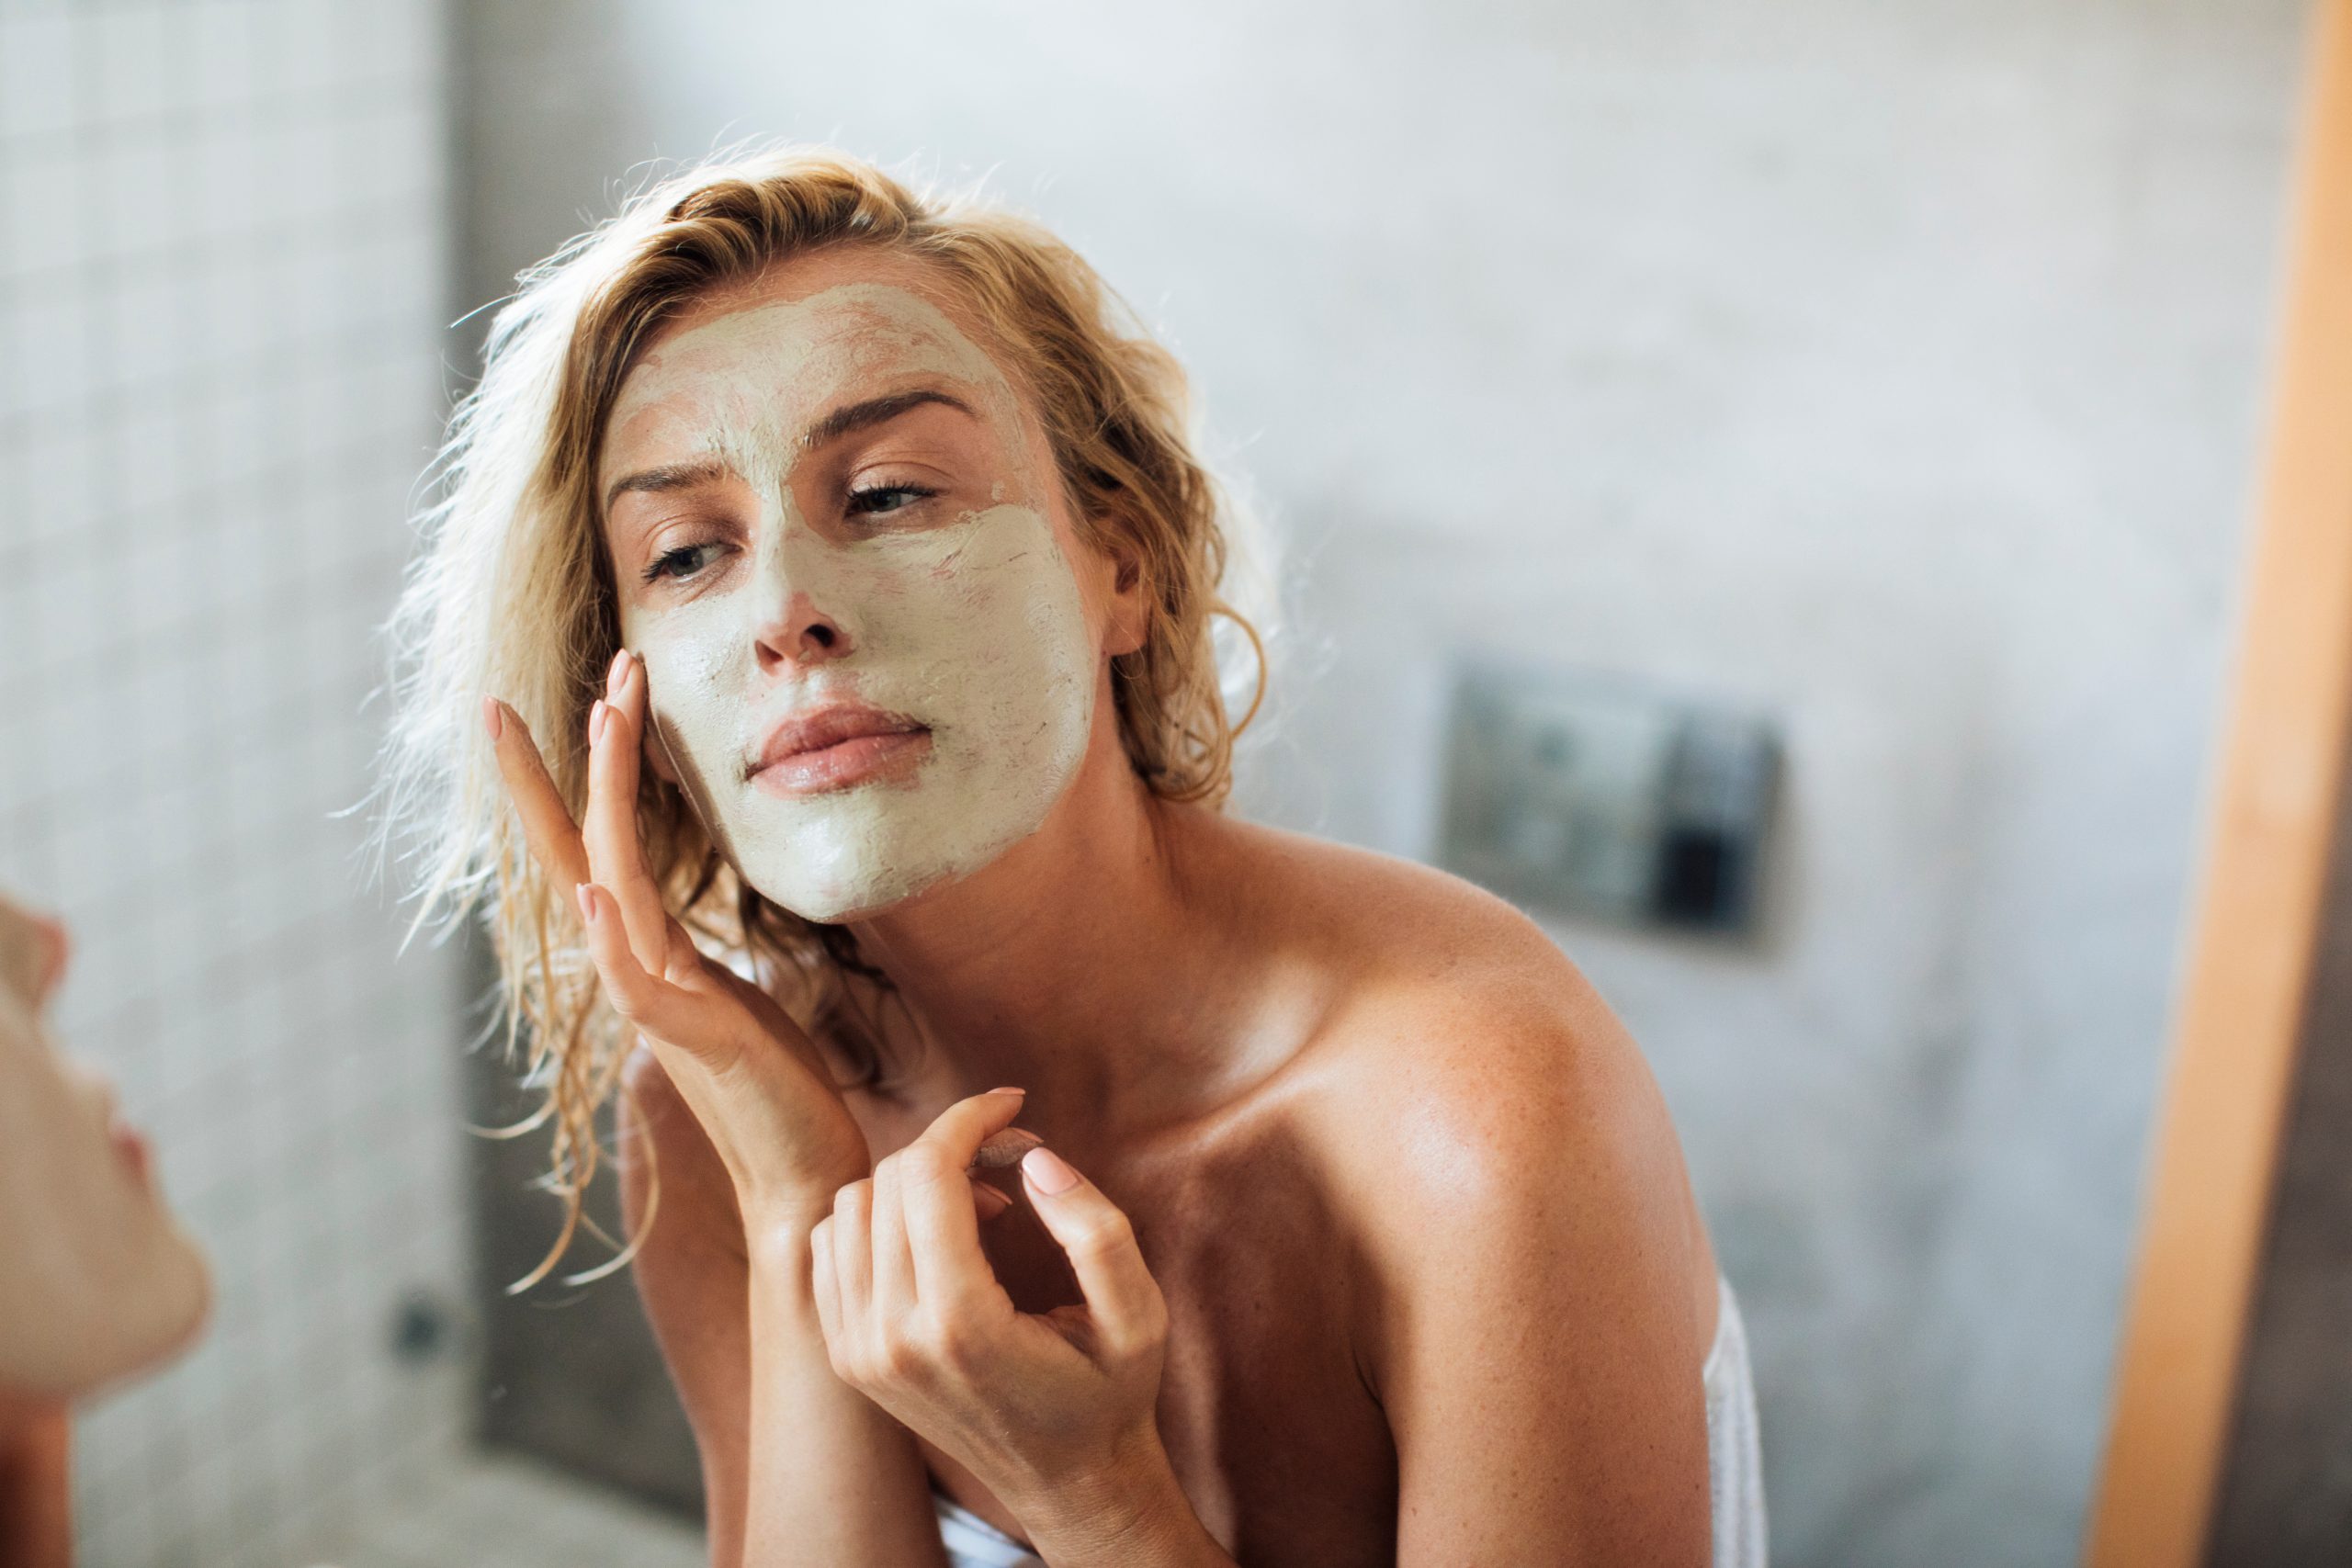 Beautiful blonde Caucasian woman standing in her bathroom and putting cosmetic mask on her face.